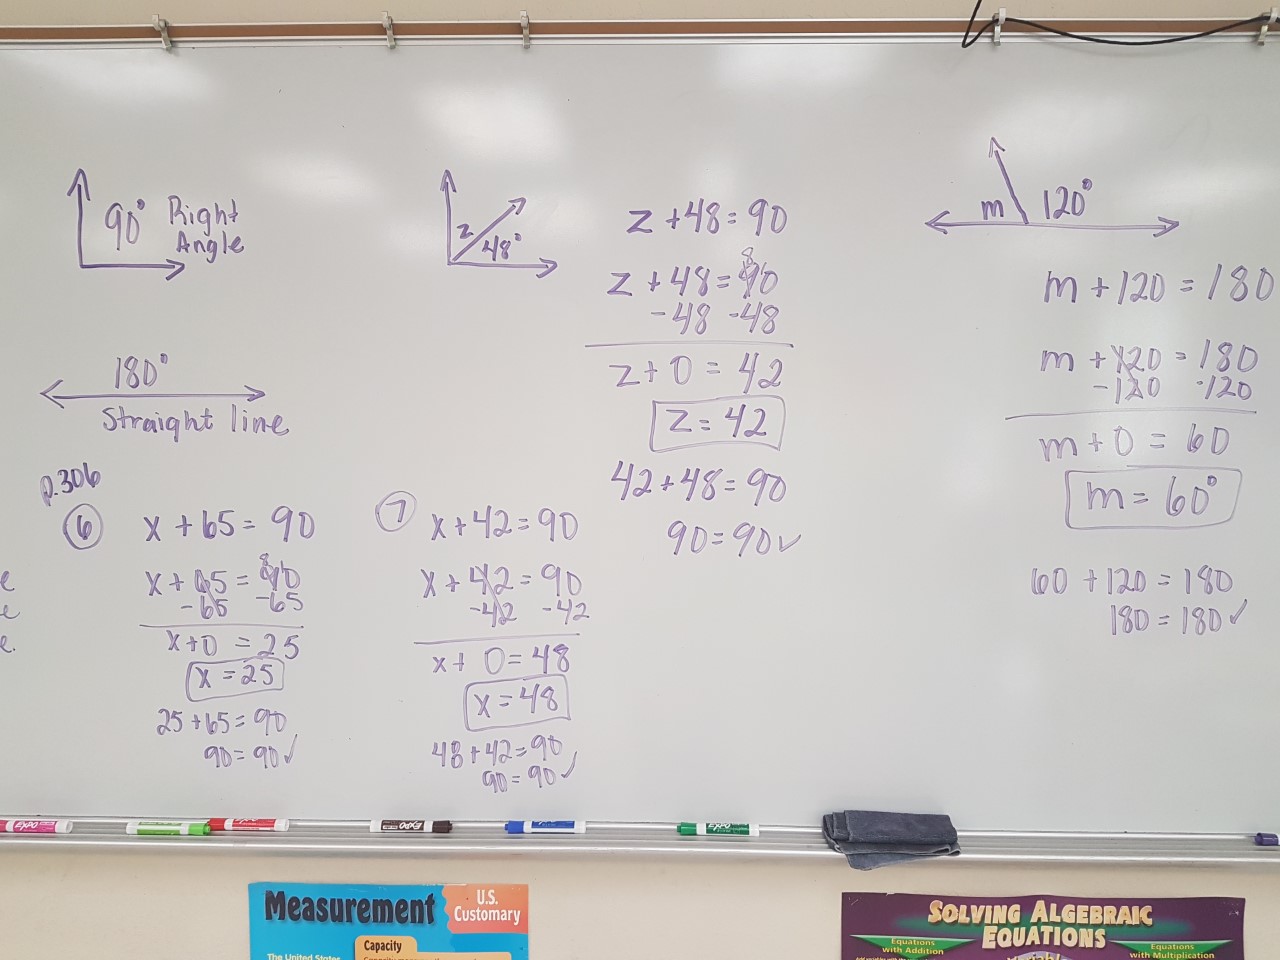 Mrs. Negron 6th Grade Math Class: Lesson 11.2 Adding & Subtracting